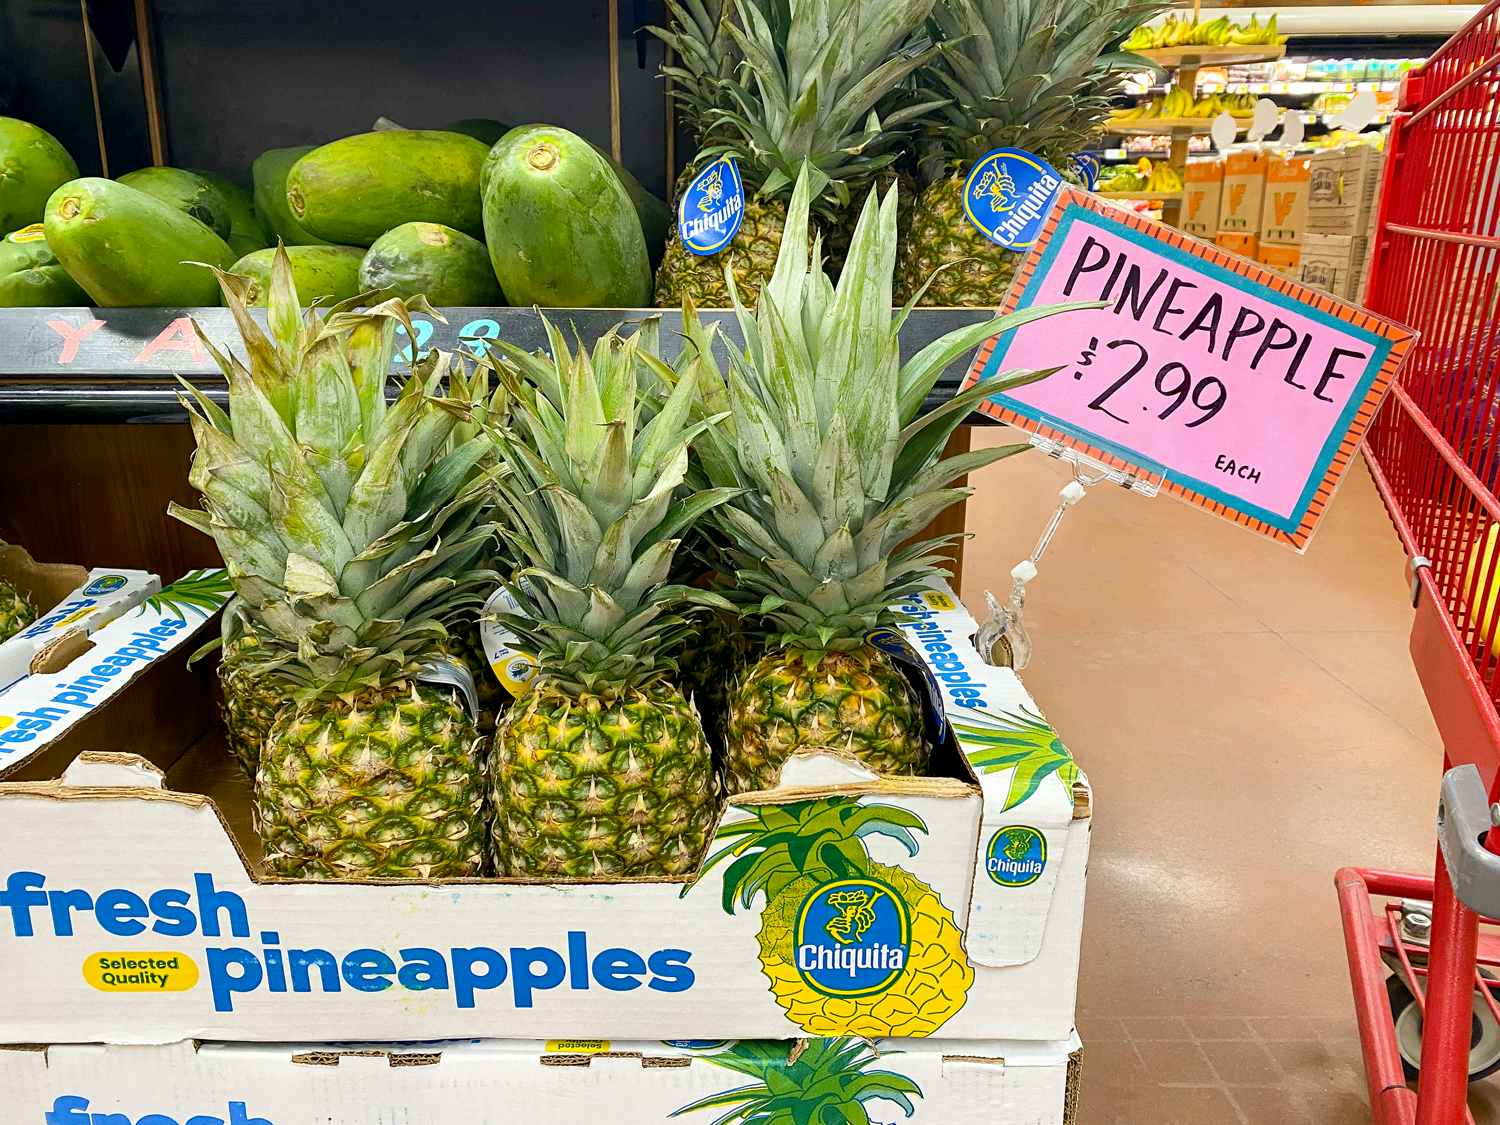 fresh pineapples with price sign in trader joes